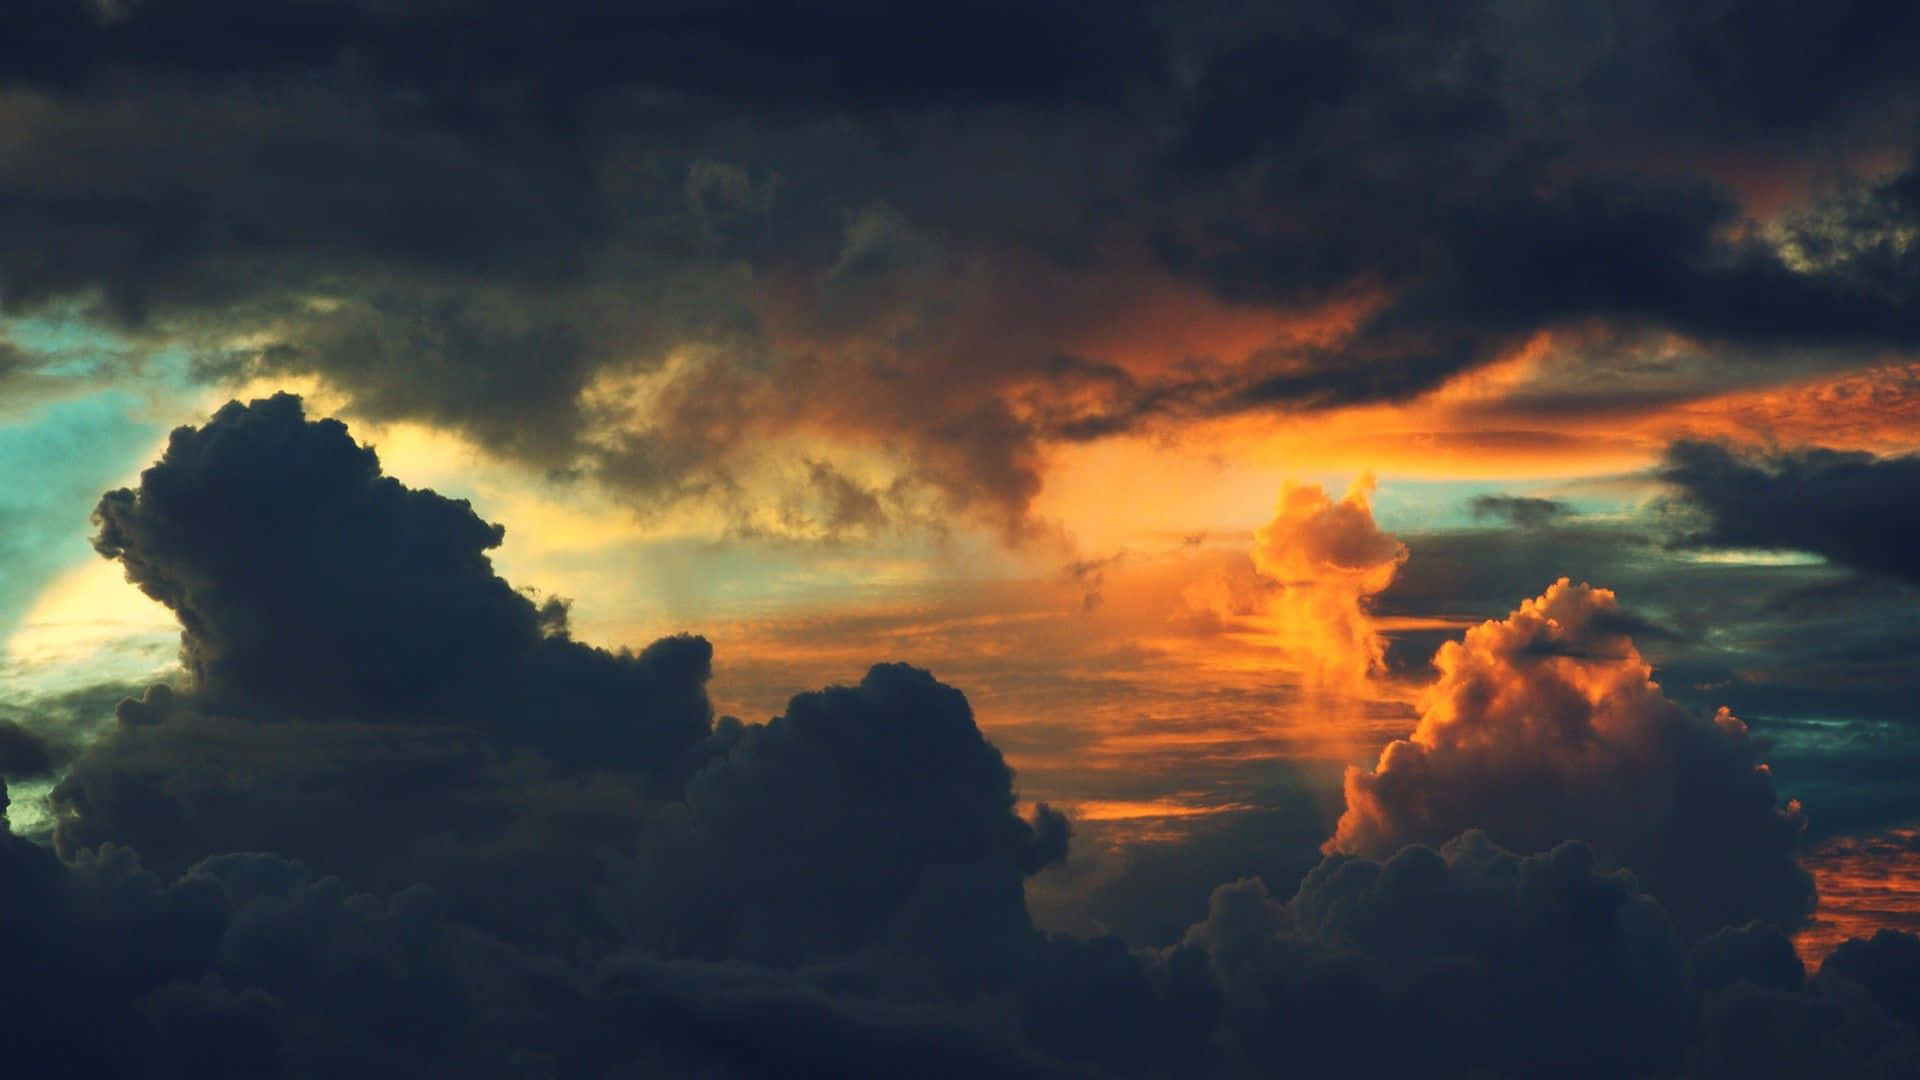 Find serenity among the clouds with this stunning aesthetic cloud background.